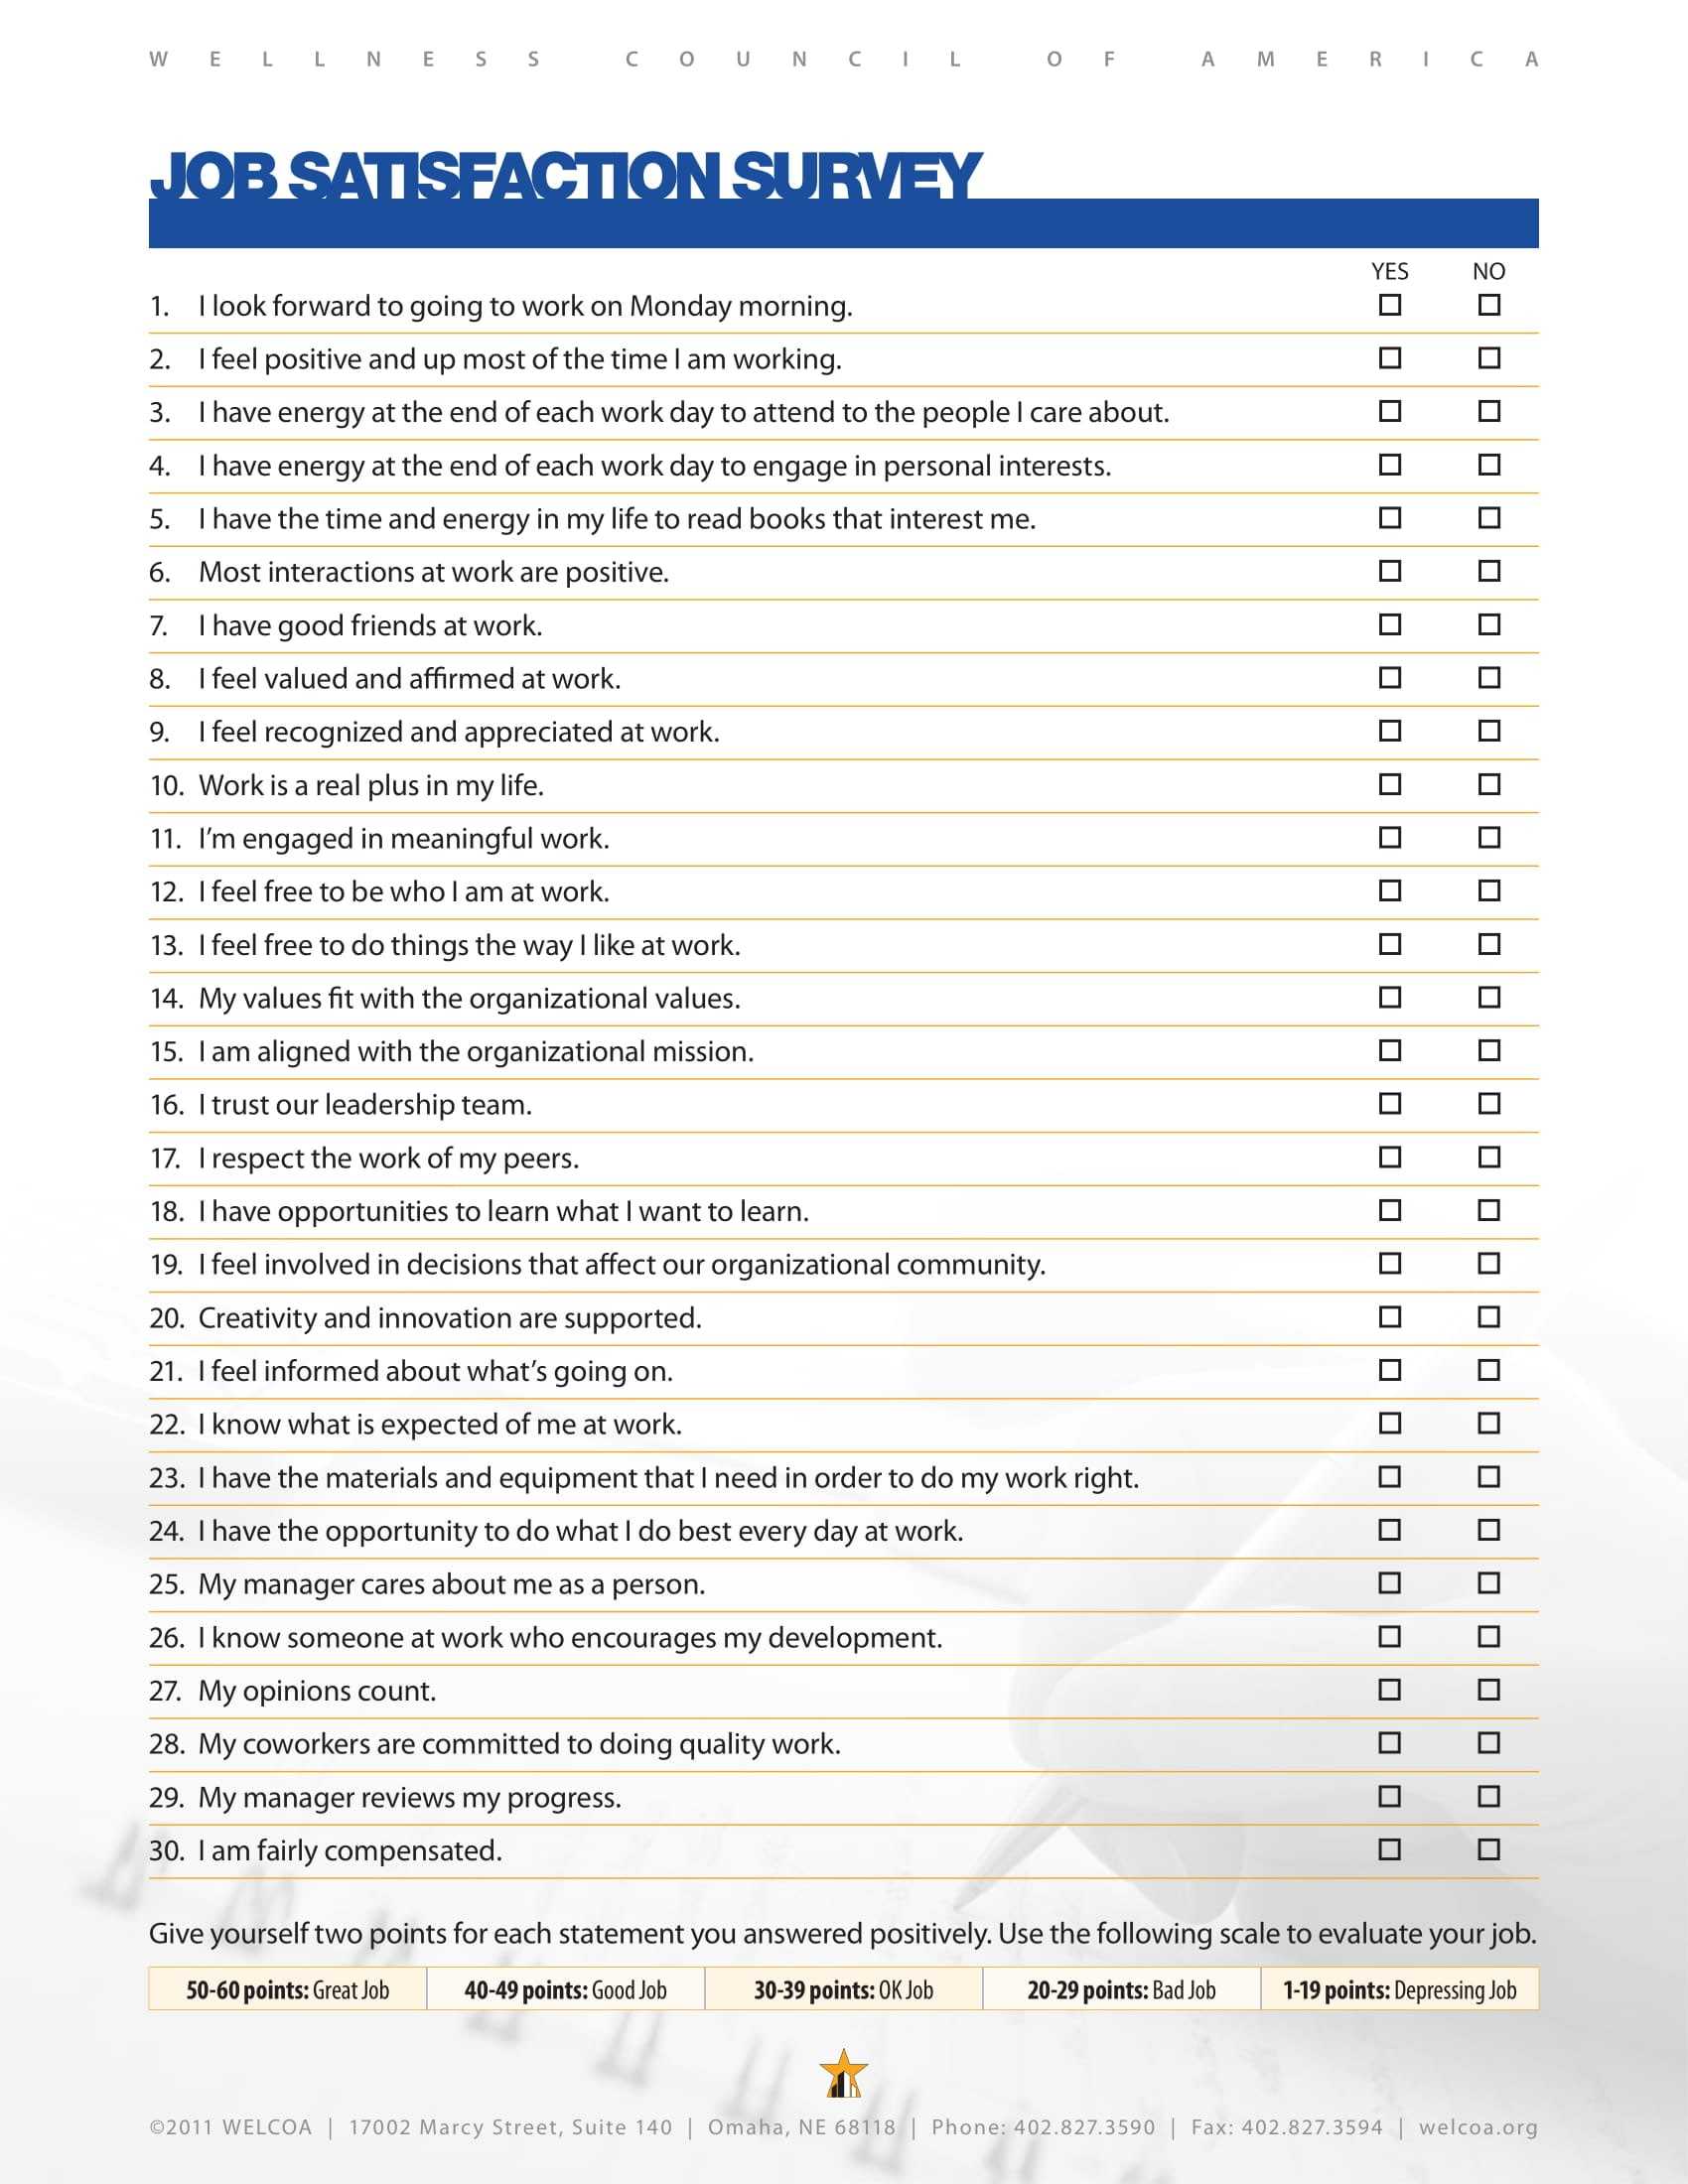 14+ Employee Satisfaction Survey Form Examples - Pdf, Doc Within Employee Satisfaction Survey Template Word